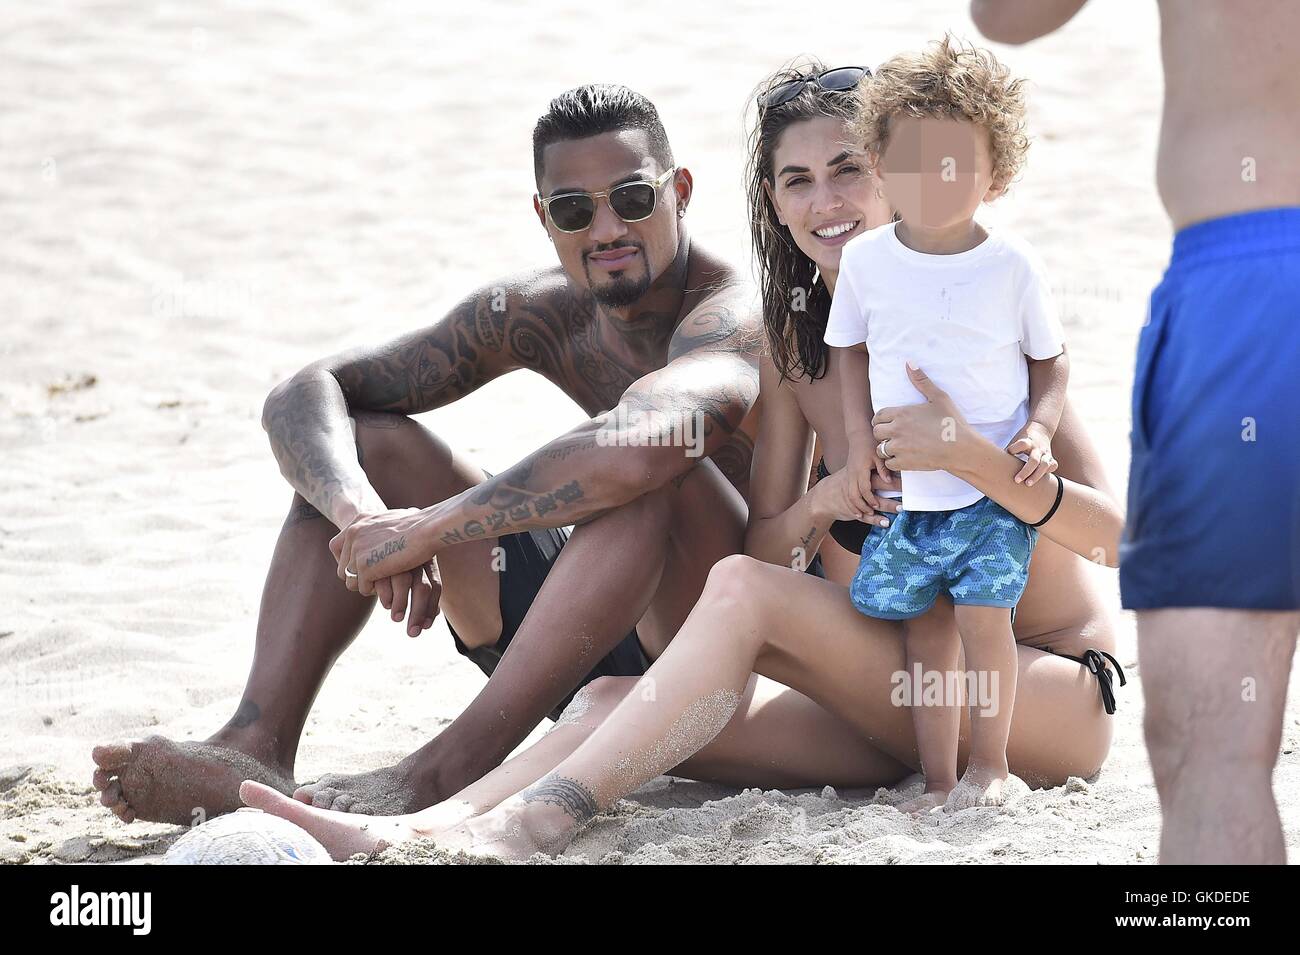 Kevin-Prince Boateng with his wife Melissa Satta and their son Maddox  enjoying a day on the beach in Porto Cervo Featuring: Kevin-Prince Boateng, Melissa  Satta, Maddox Prince Boateng Where: Porto Cervo, Italy